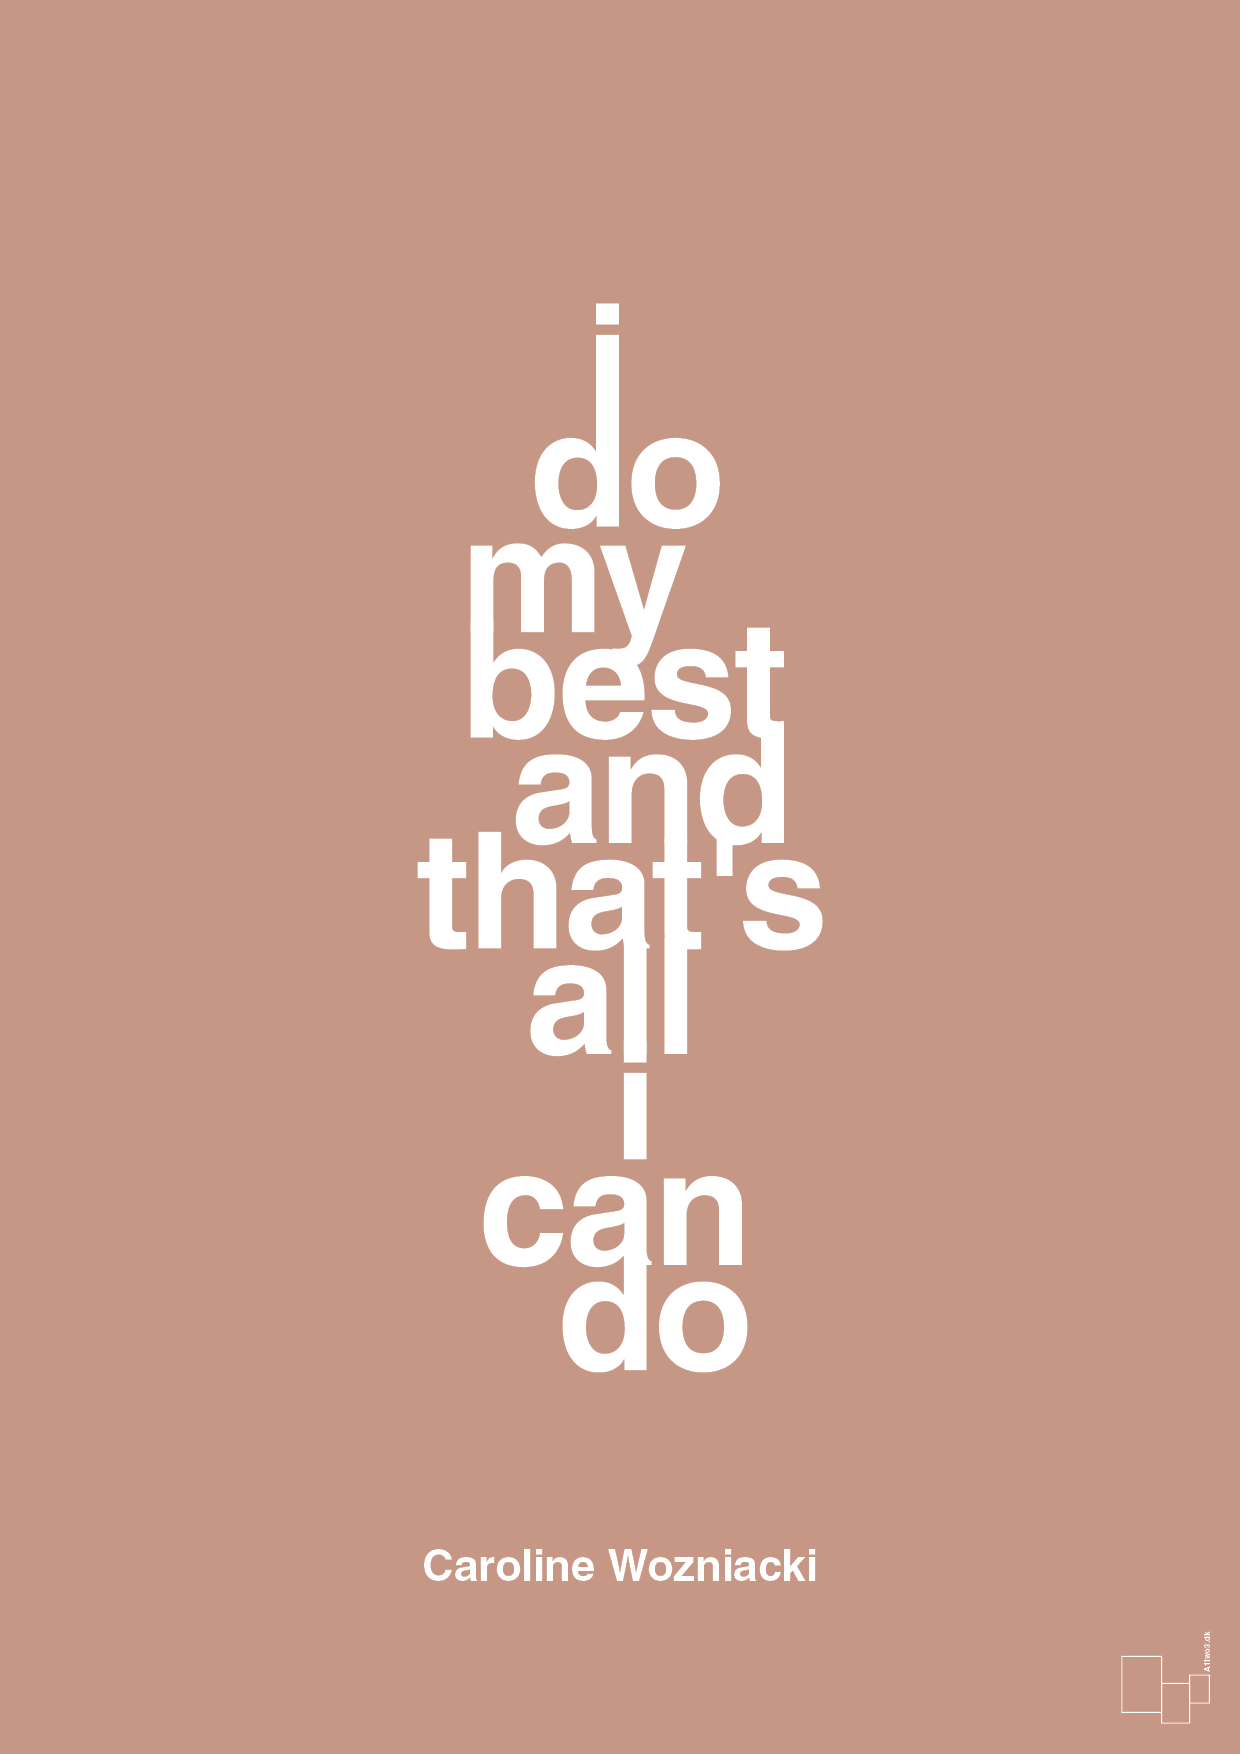 i do my best and that's all i can do - Plakat med Citater i Powder